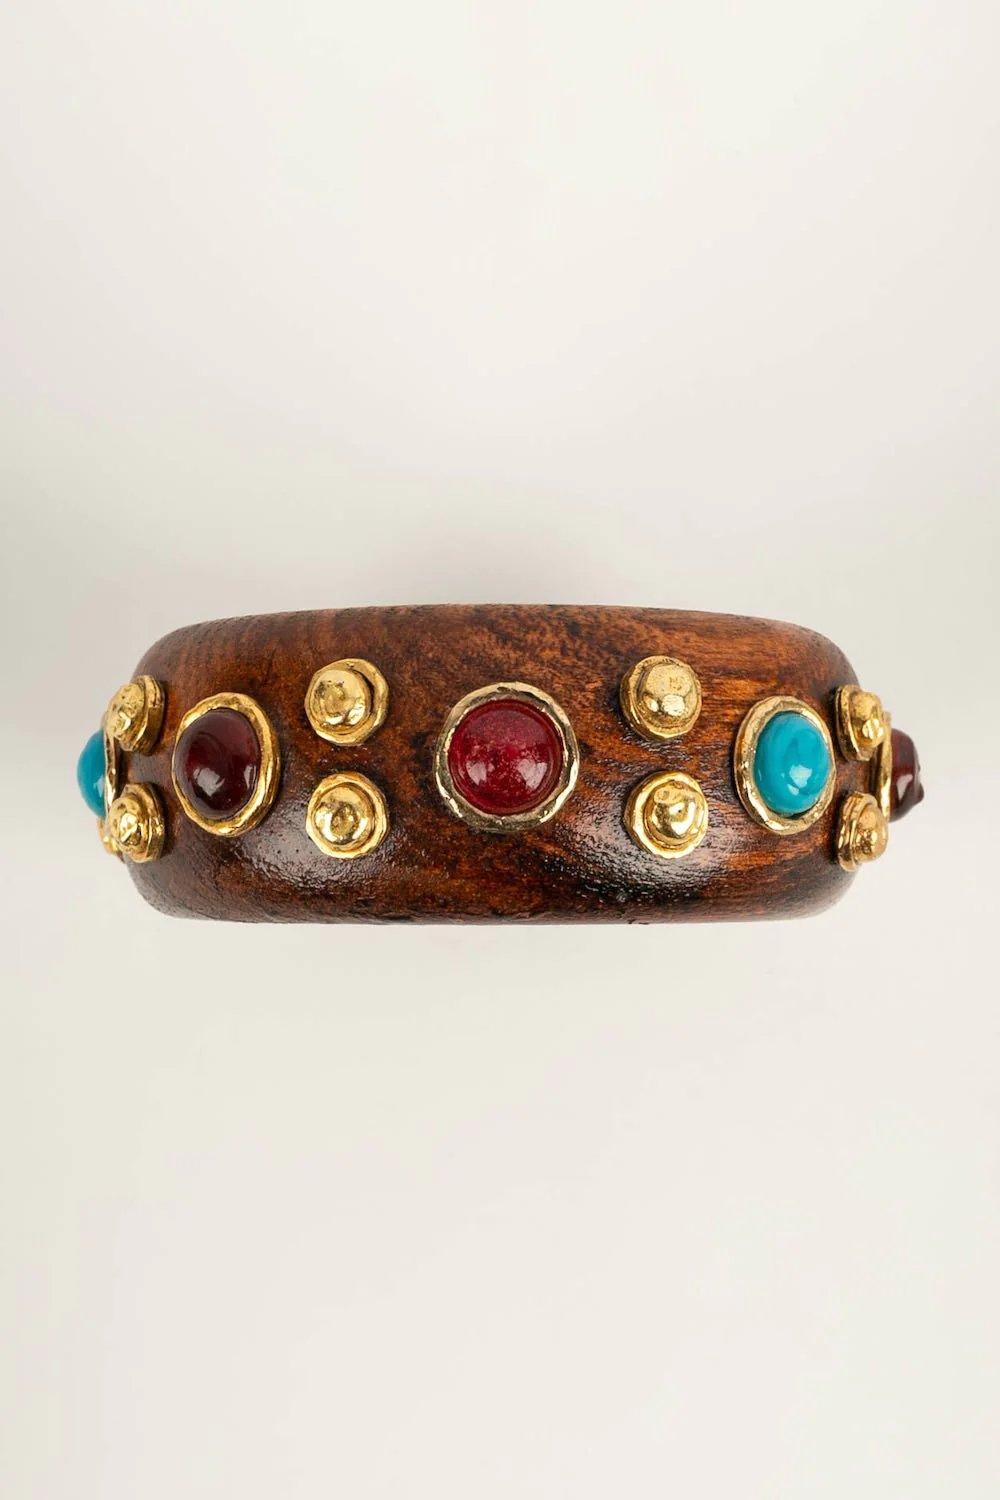 Chanel -(Made in France) Wooden and golden metal bracelet paved with multicolored cabochons.

Additional information:
Dimensions: Diameter: 7 cm 
Circumference: 20.5 cm
Condition: Very good condition
Seller Ref number: BRAB159